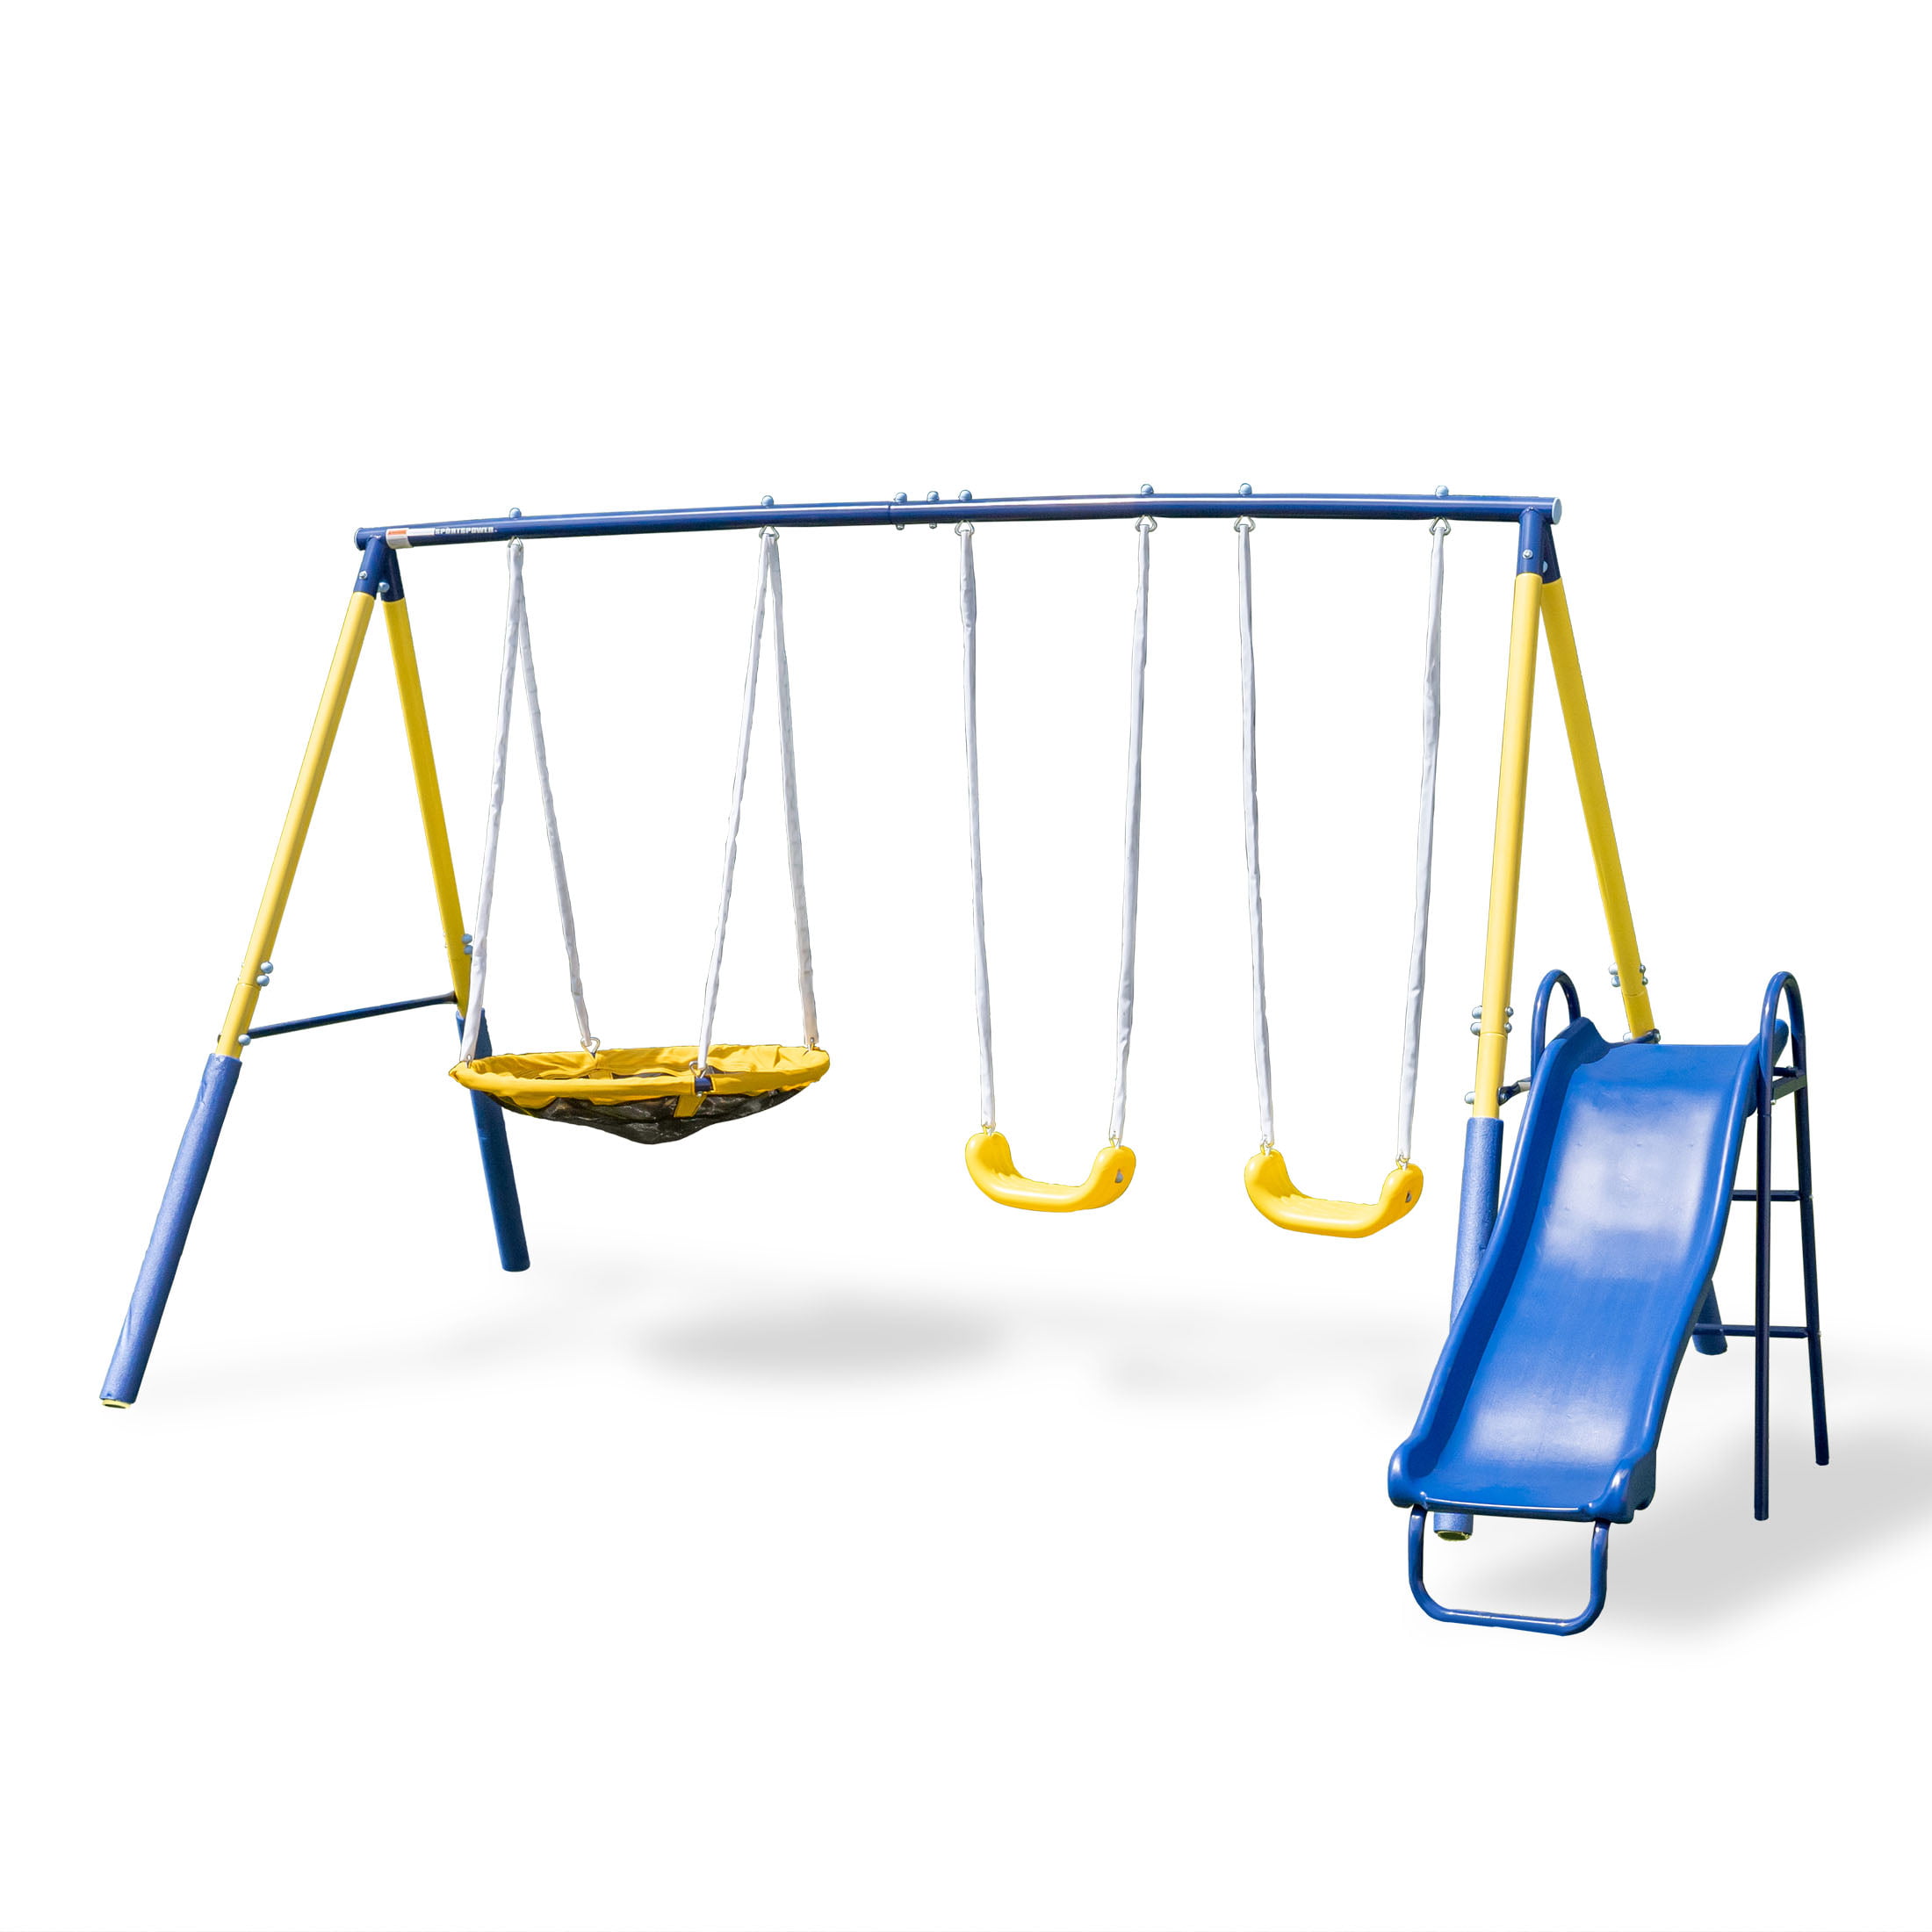 Sportspower Super Saucer Metal Swing Set with 2 Swings, Saucer Swing and a 1pc Heavy Duty Slide - 3